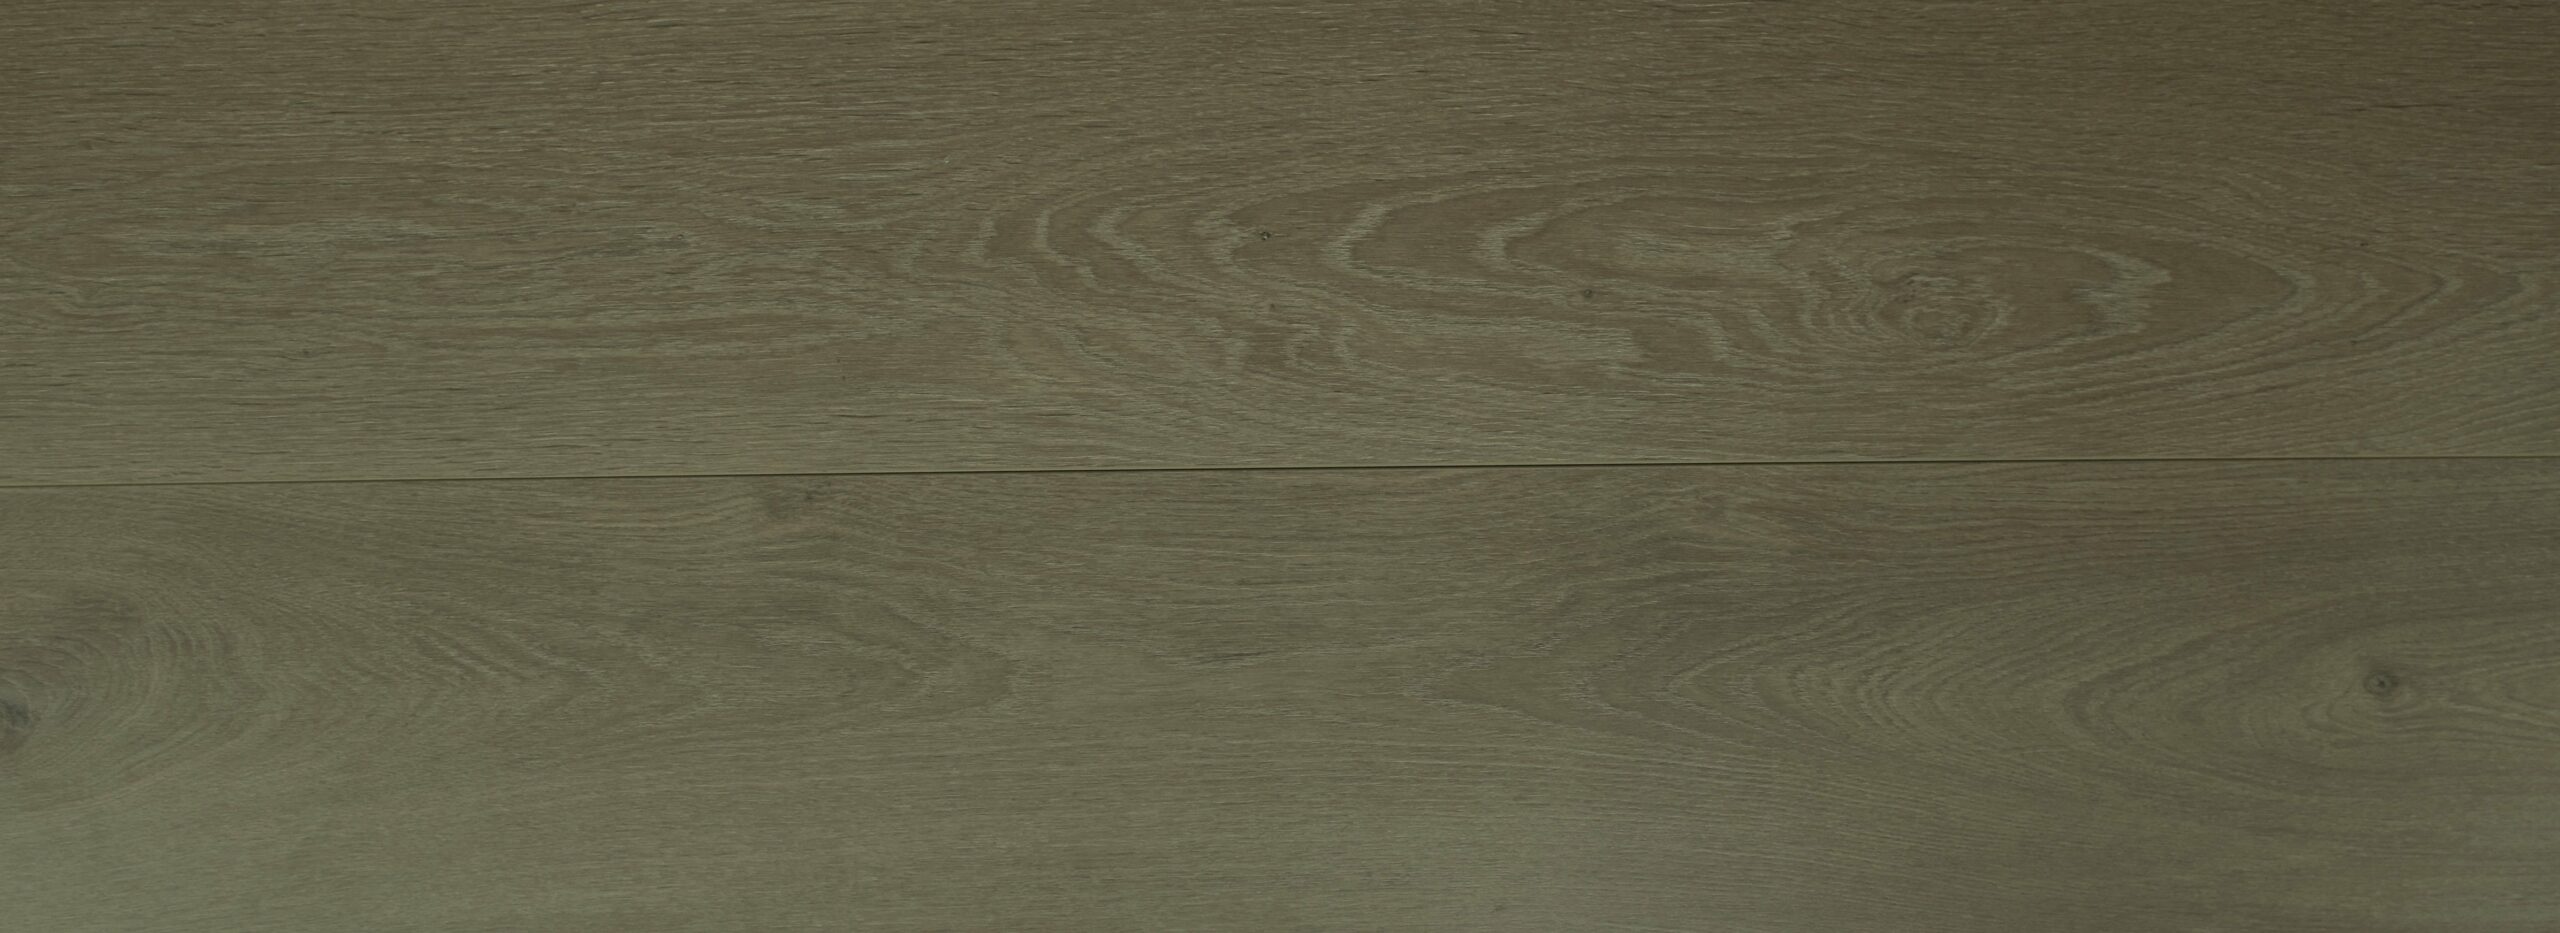 Fumed Oak Trident Laminate Flooring with Built-In EIR Backing and AC4 wear layer